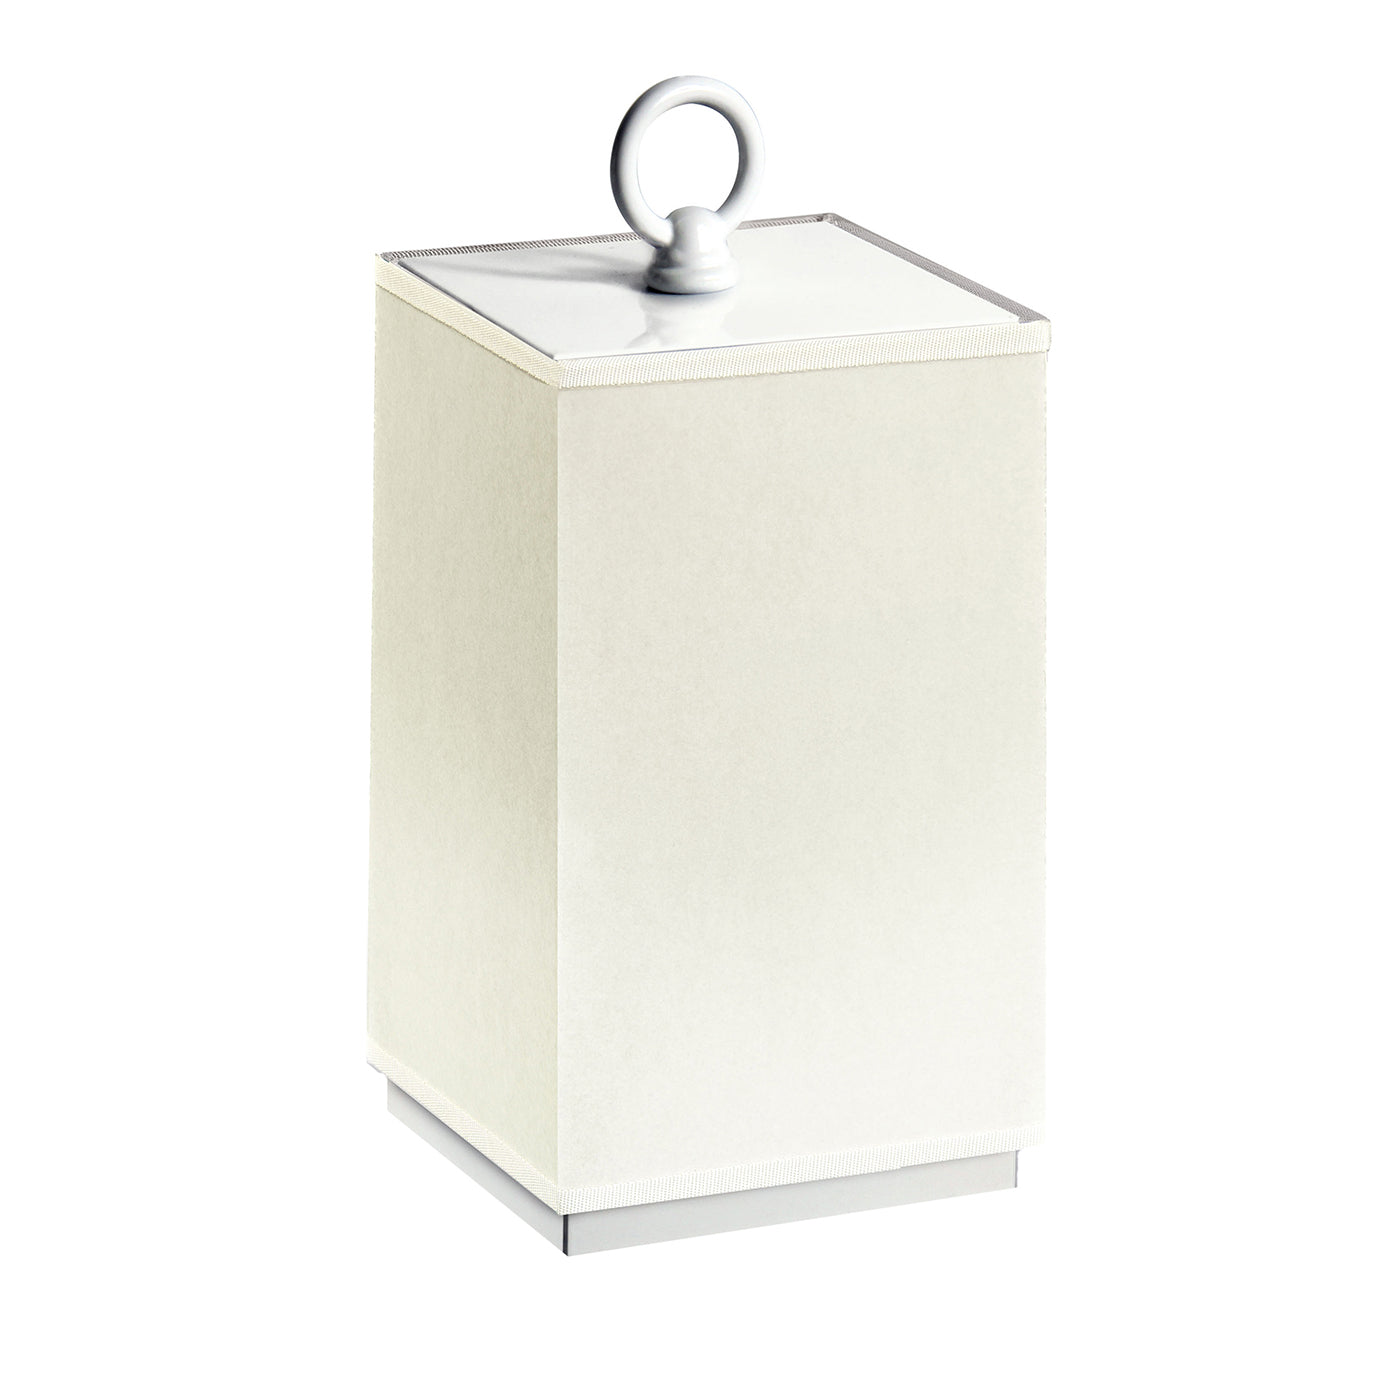 Starlet Q White Parchment Table Lamp by Stefano Tabarin - Main view